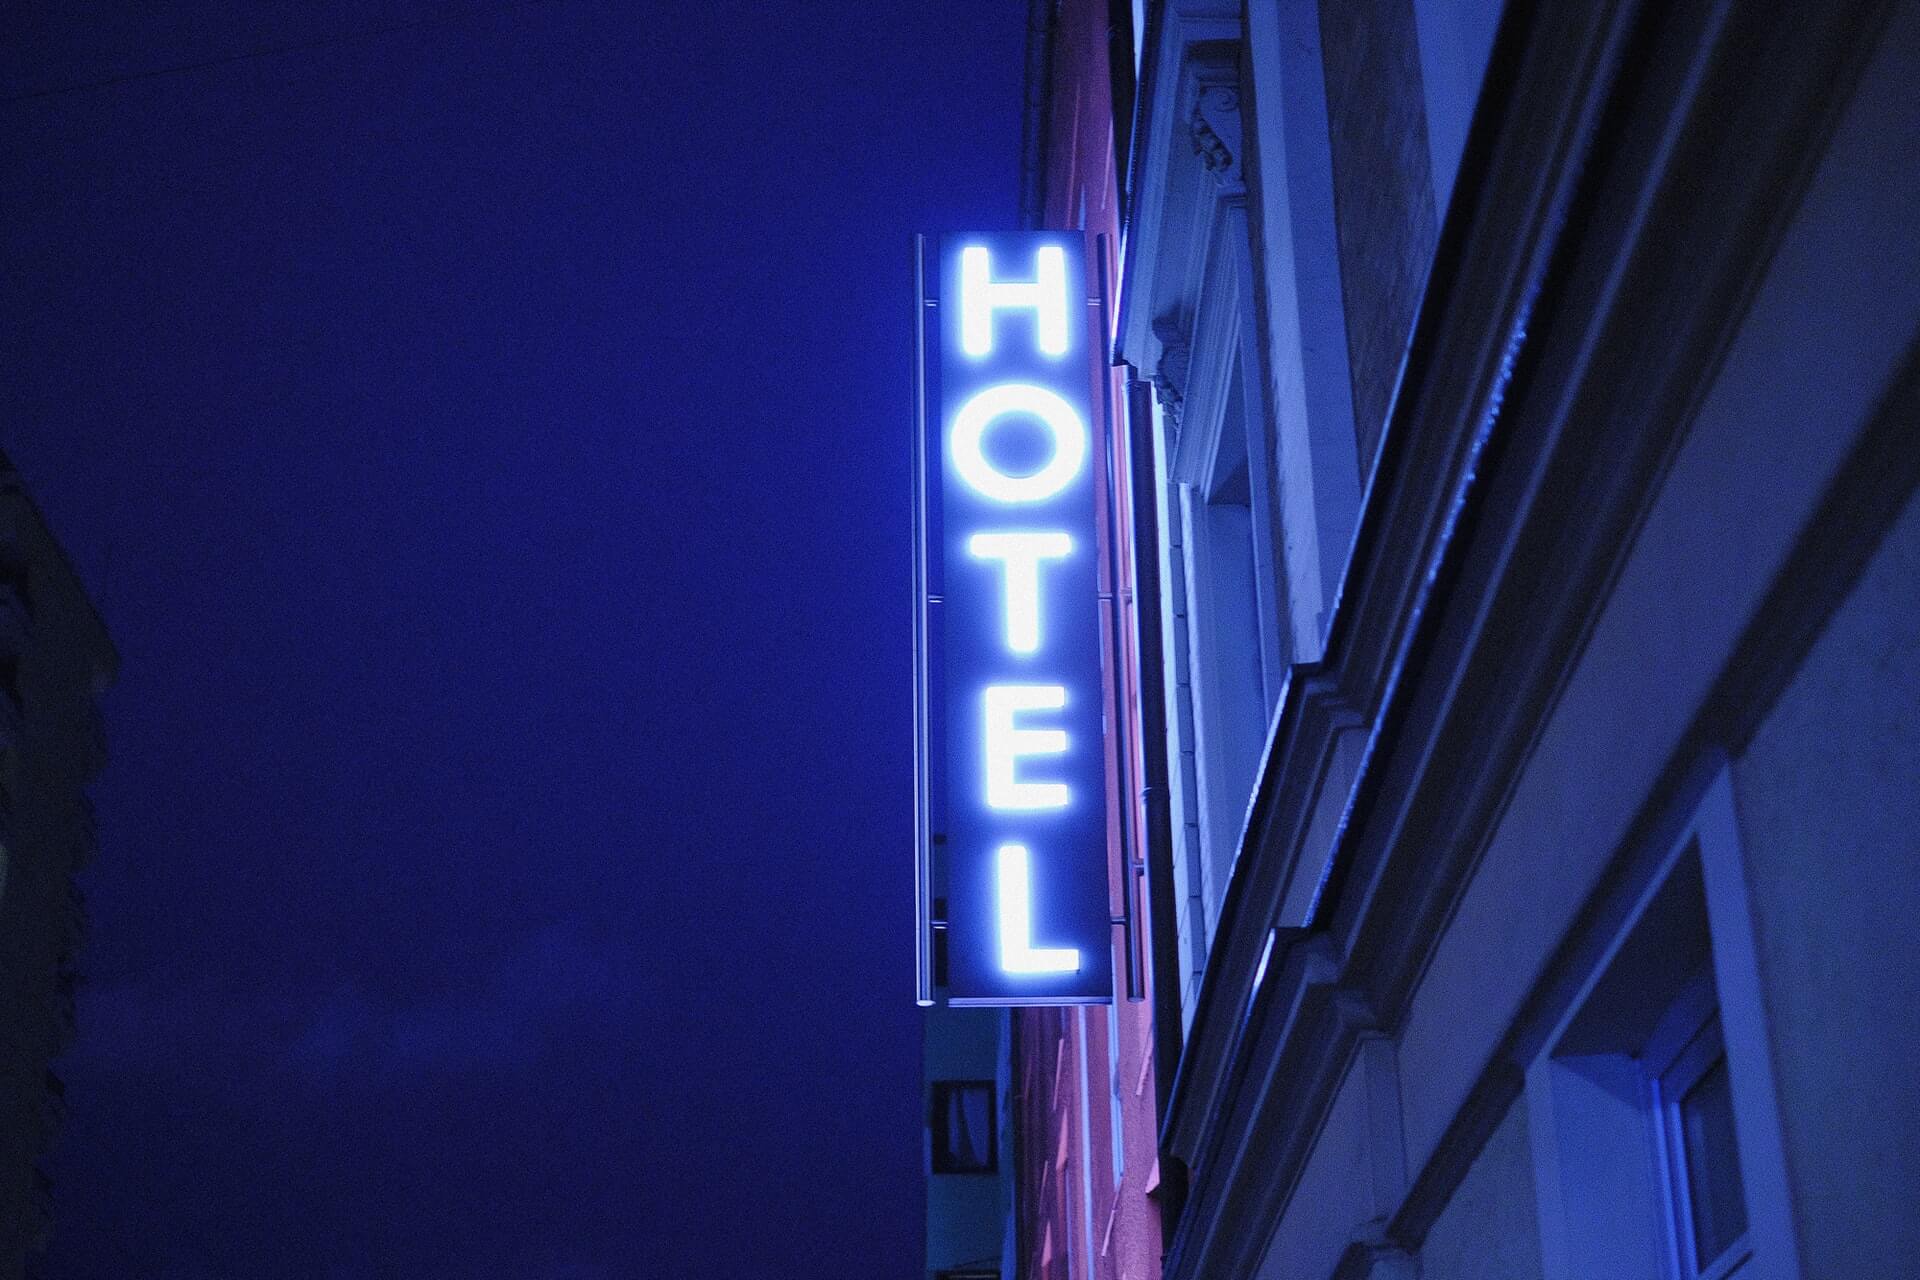 Lit neon hotel sign with blue and purple background